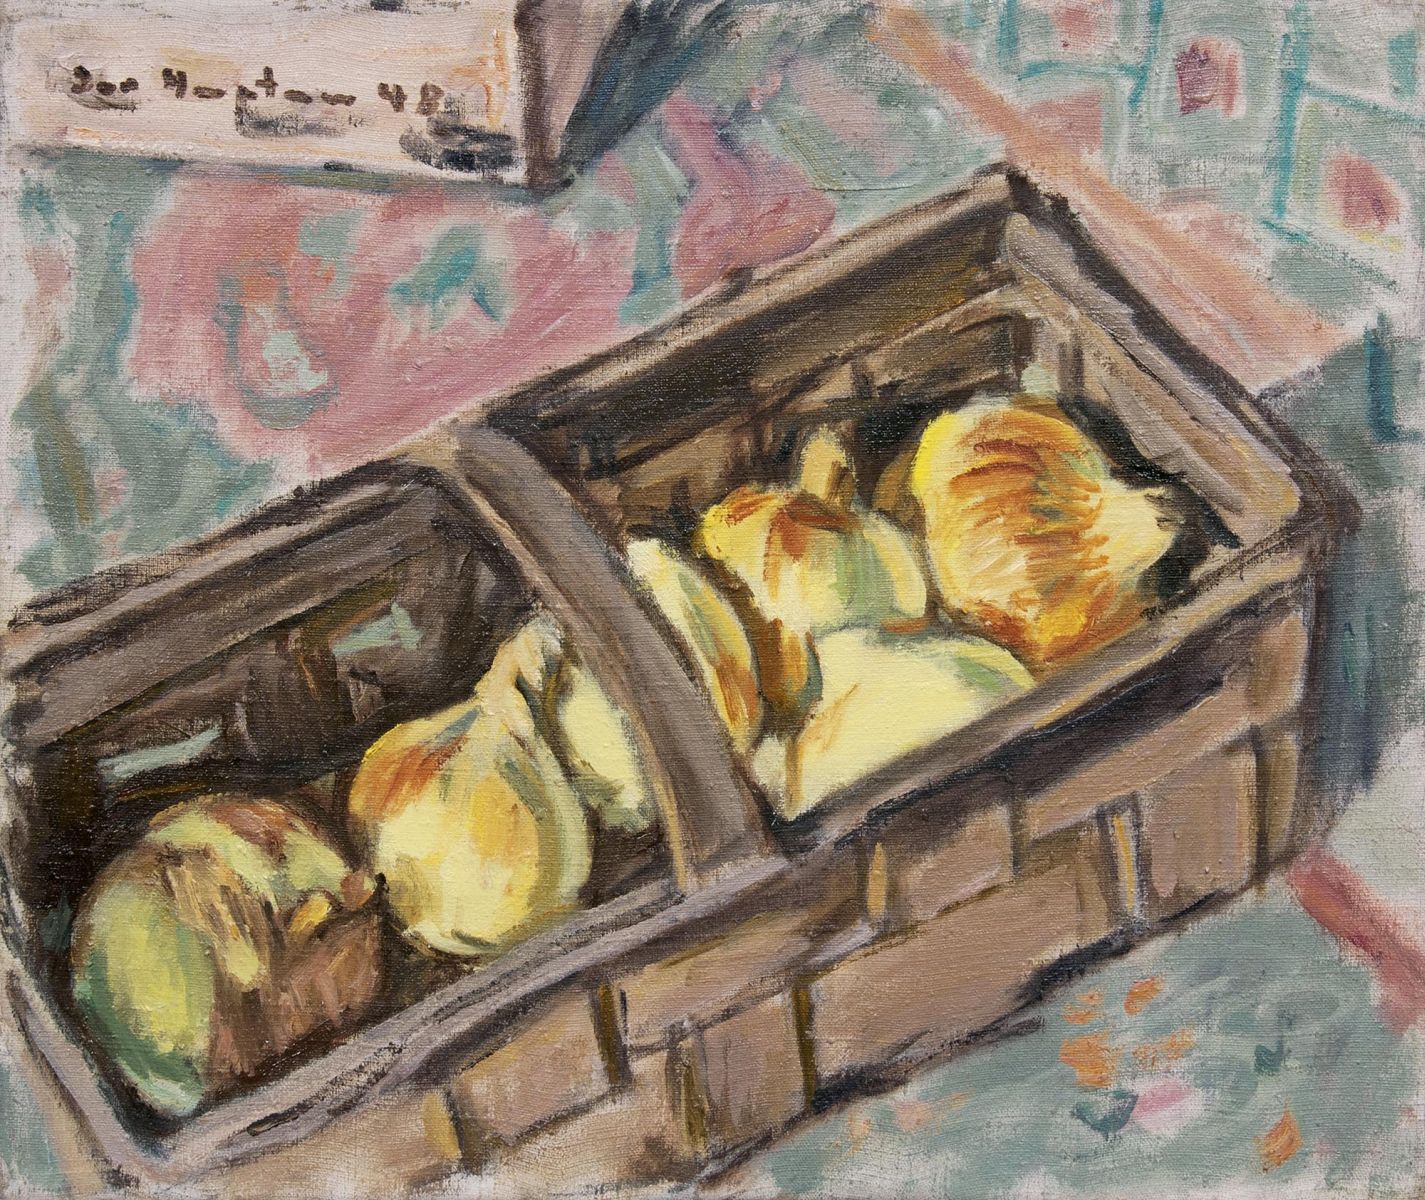 Pears in a Basket